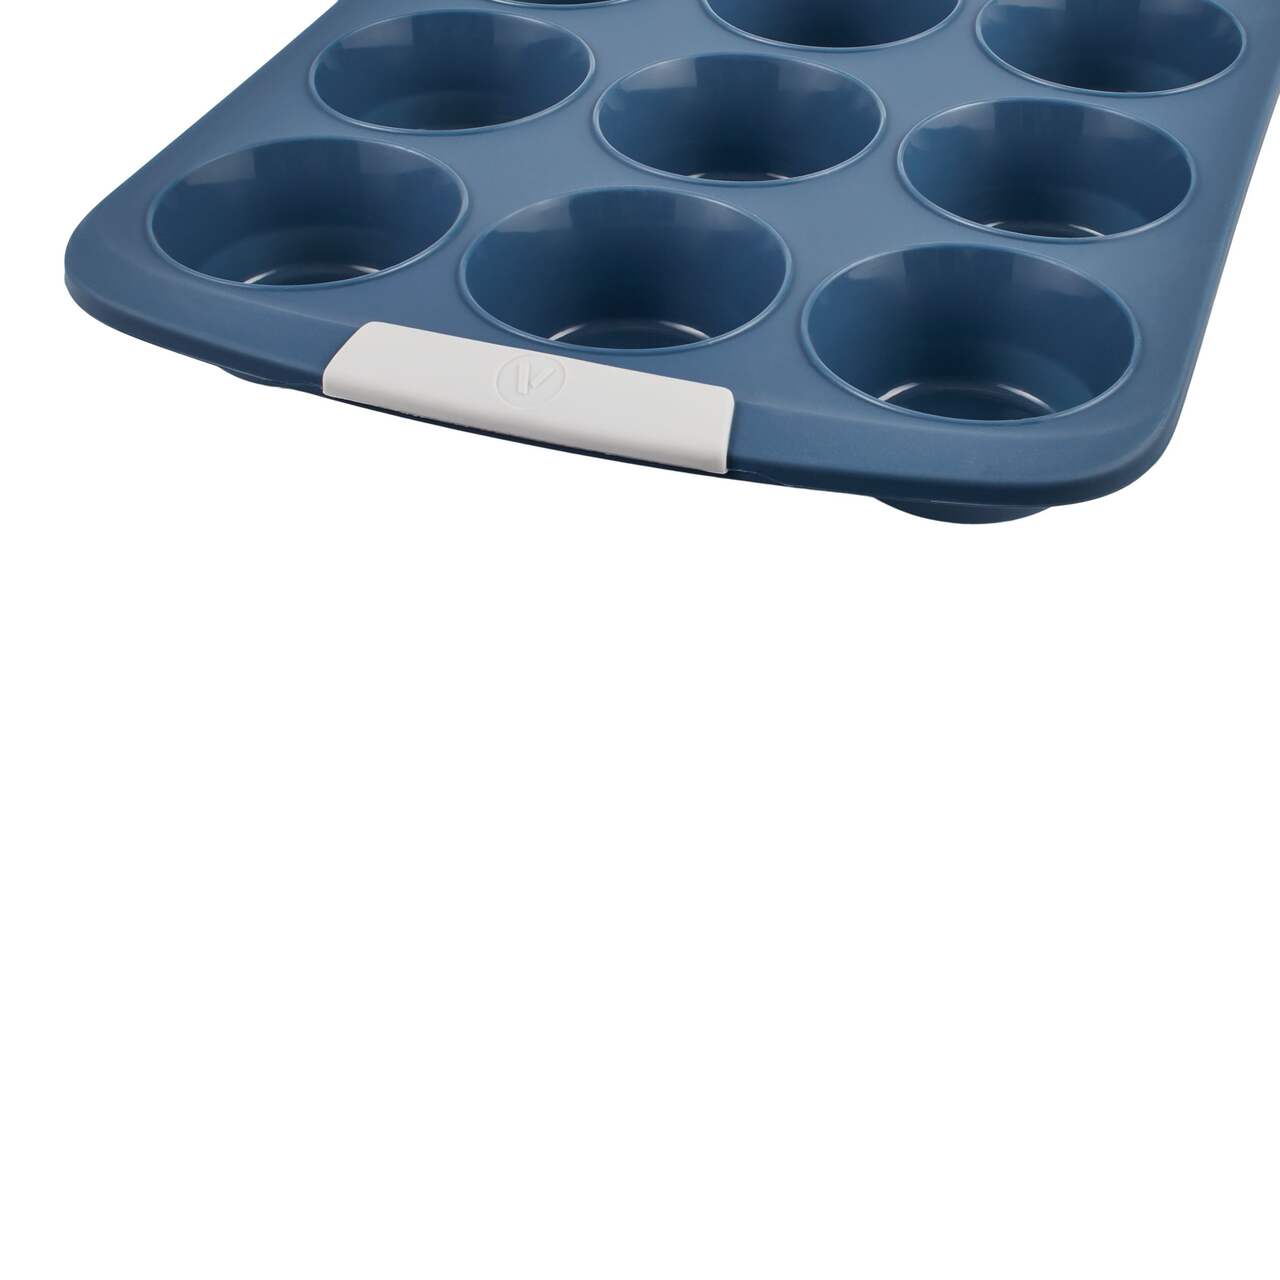 https://media-www.canadiantire.ca/product/living/kitchen/bakeware-baking-prep/1429688/vida-silicone-with-structure-12-cup-muffin-pan-db802c5b-9d44-4f51-b47e-44d3b012f7bf-jpgrendition.jpg?imdensity=1&imwidth=1244&impolicy=mZoom